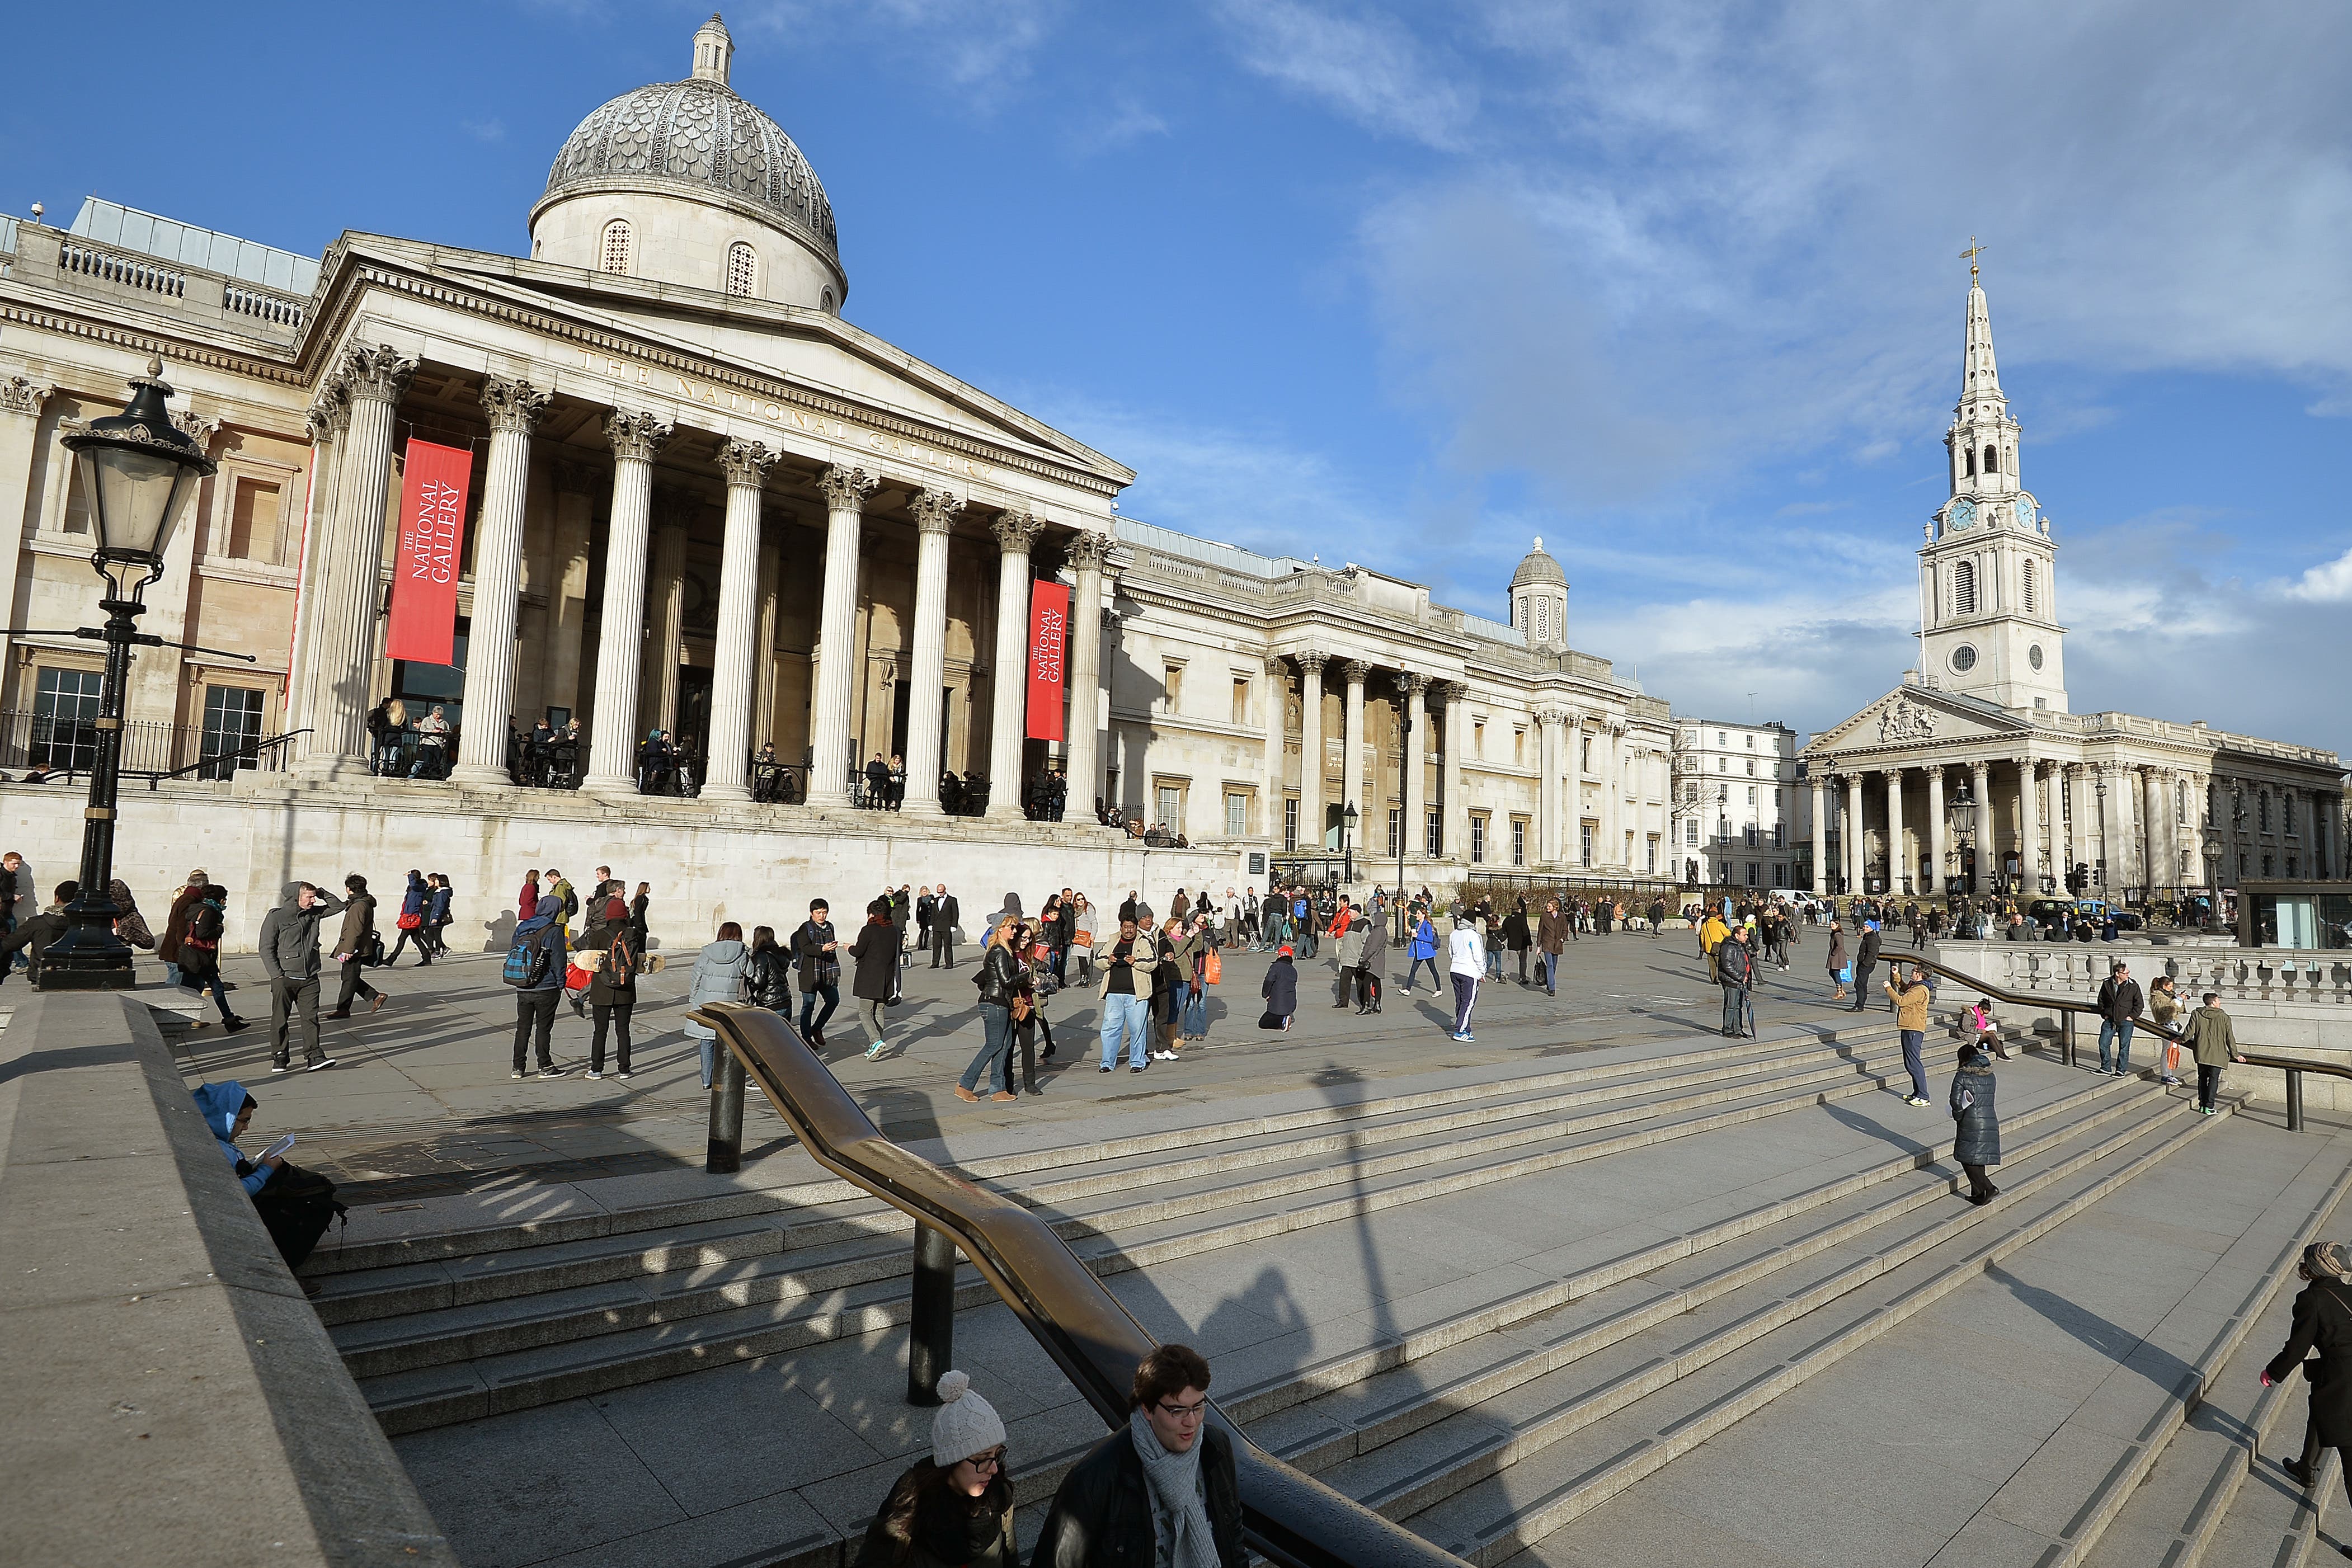 A view of the main entrance of the National Gallery in Trafalgar Square (John Stillwell/PA)